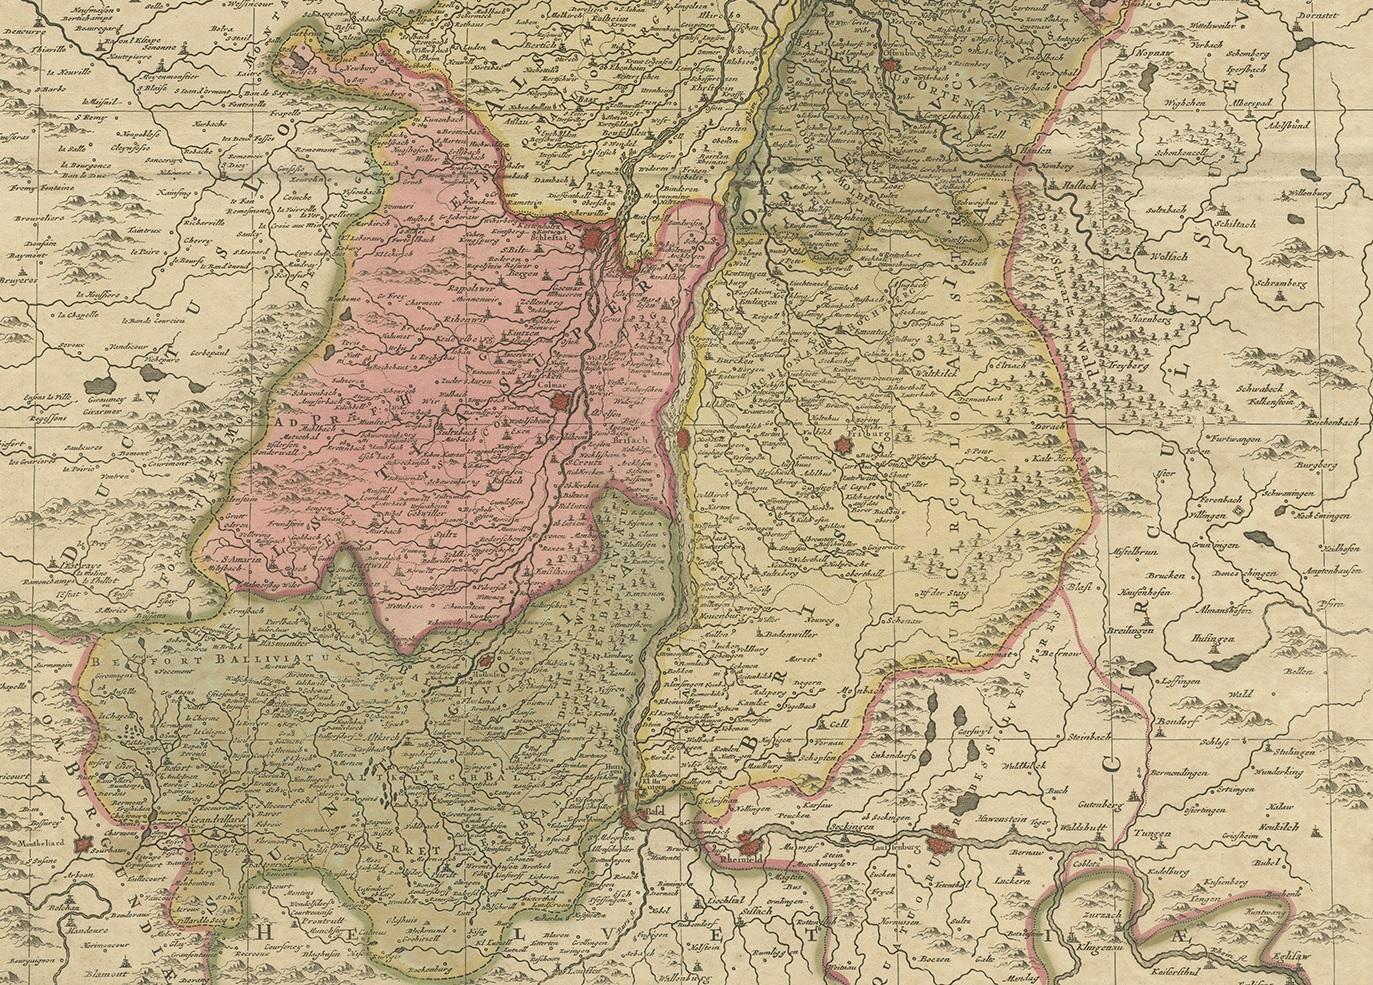 alsace france map